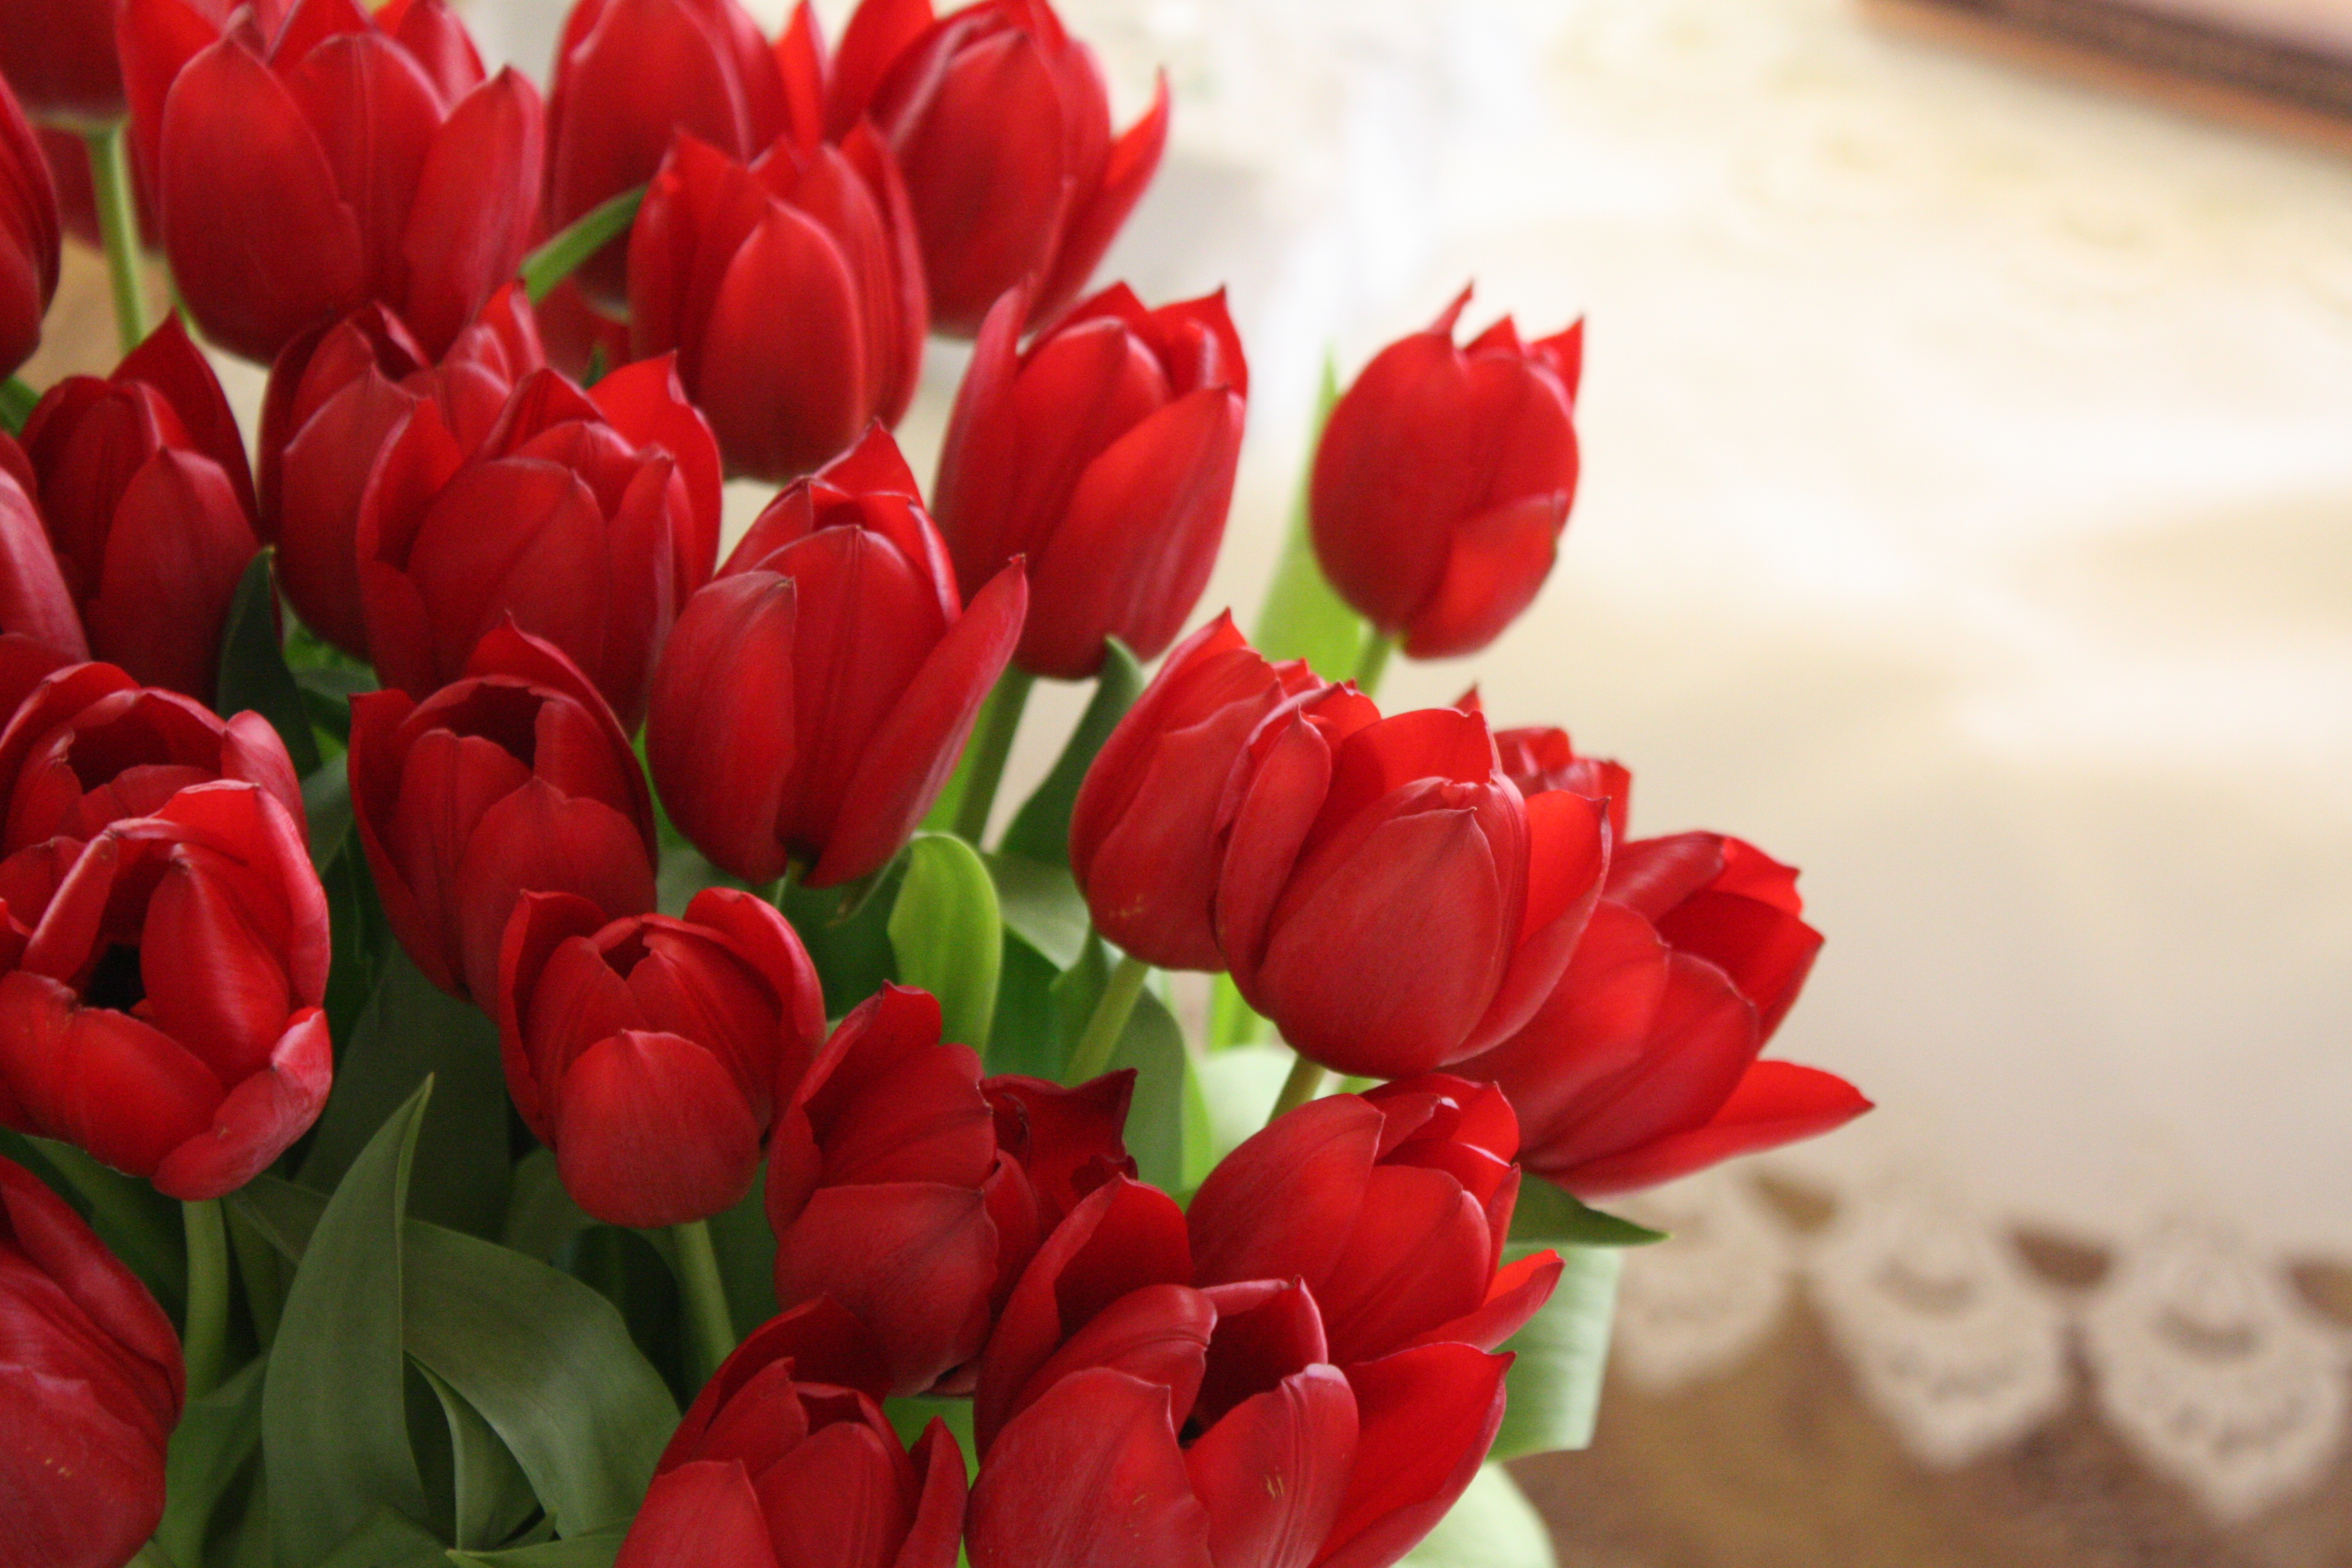 flowers, tulips, red, bouquet, handsomely, it's beautiful QHD